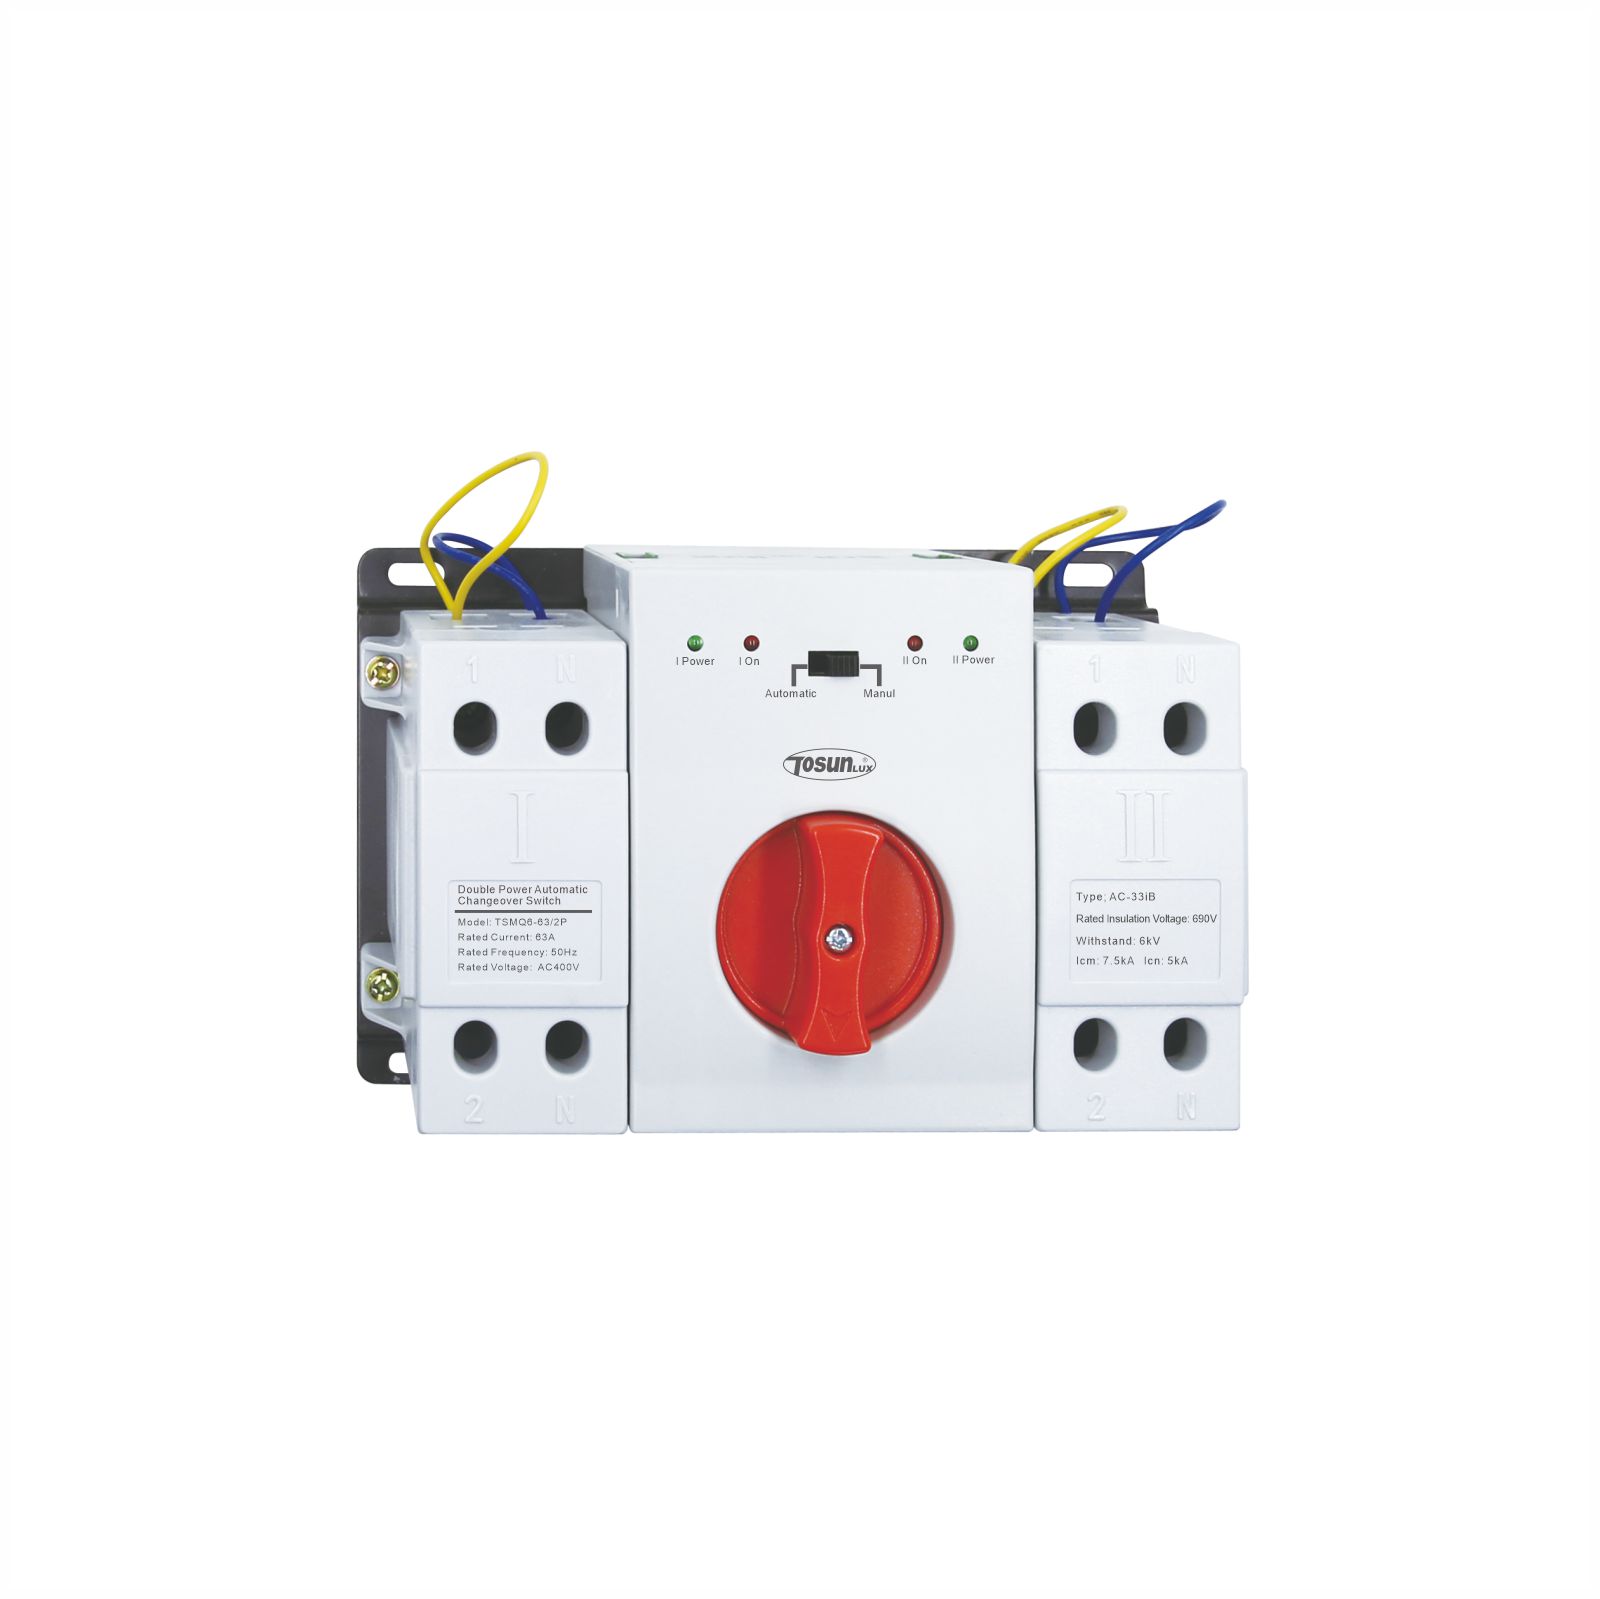 The Double Power Automatic Changeover Switch Guide-Seamless Power